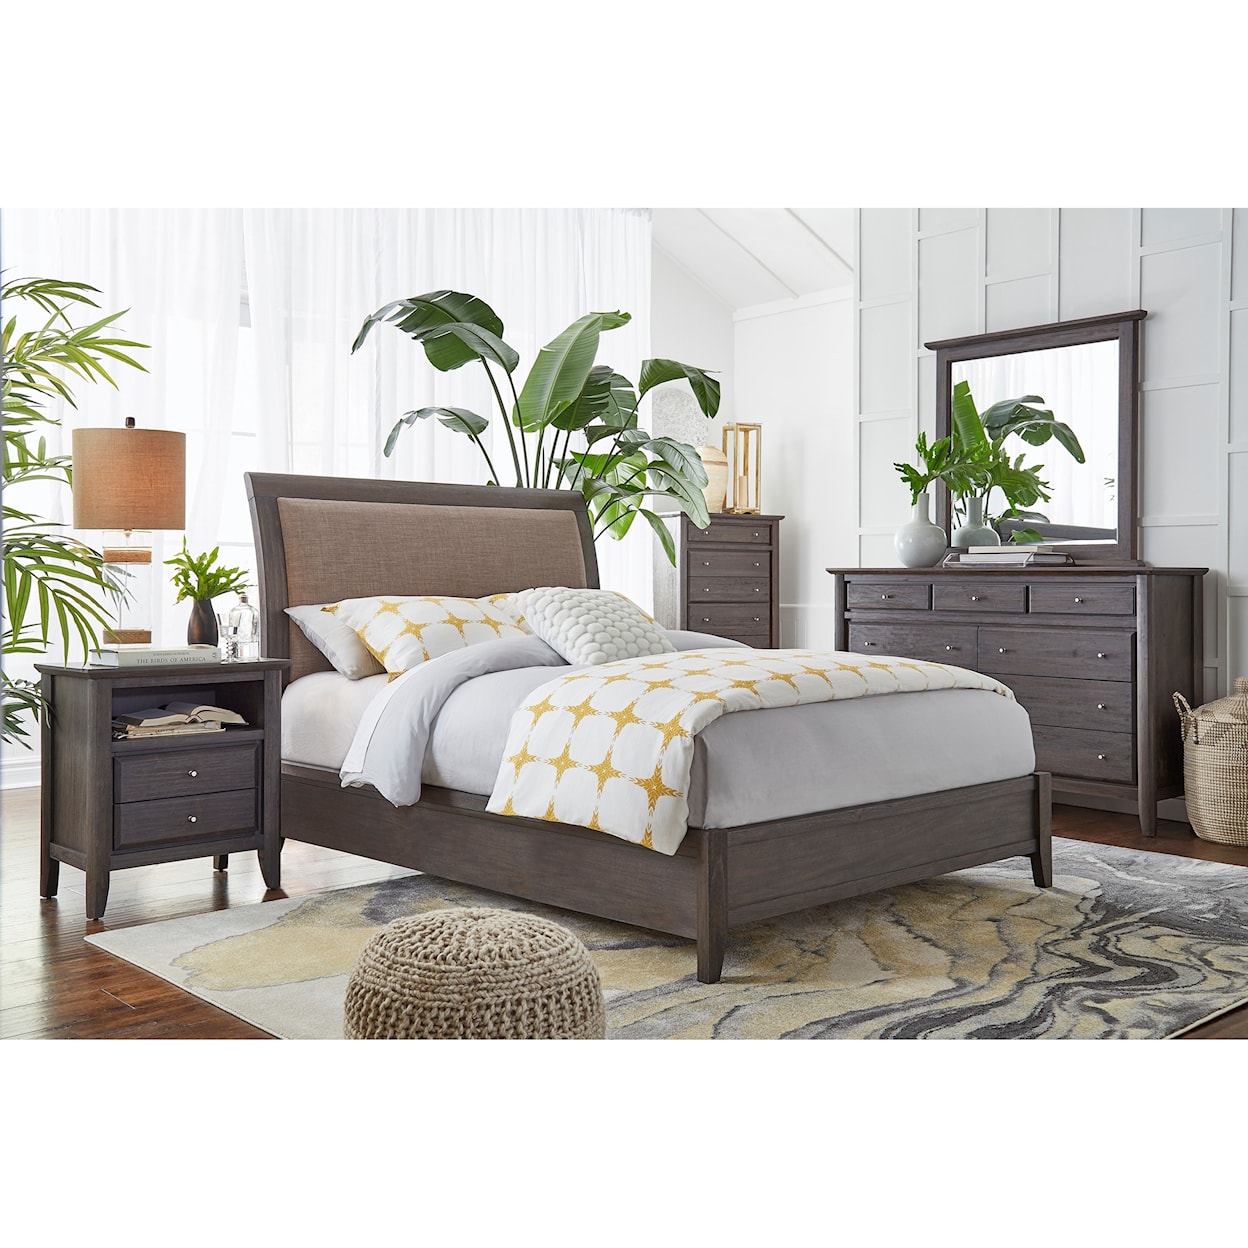 Modus International City II Full Upholstered Low Profile Sleigh Bed